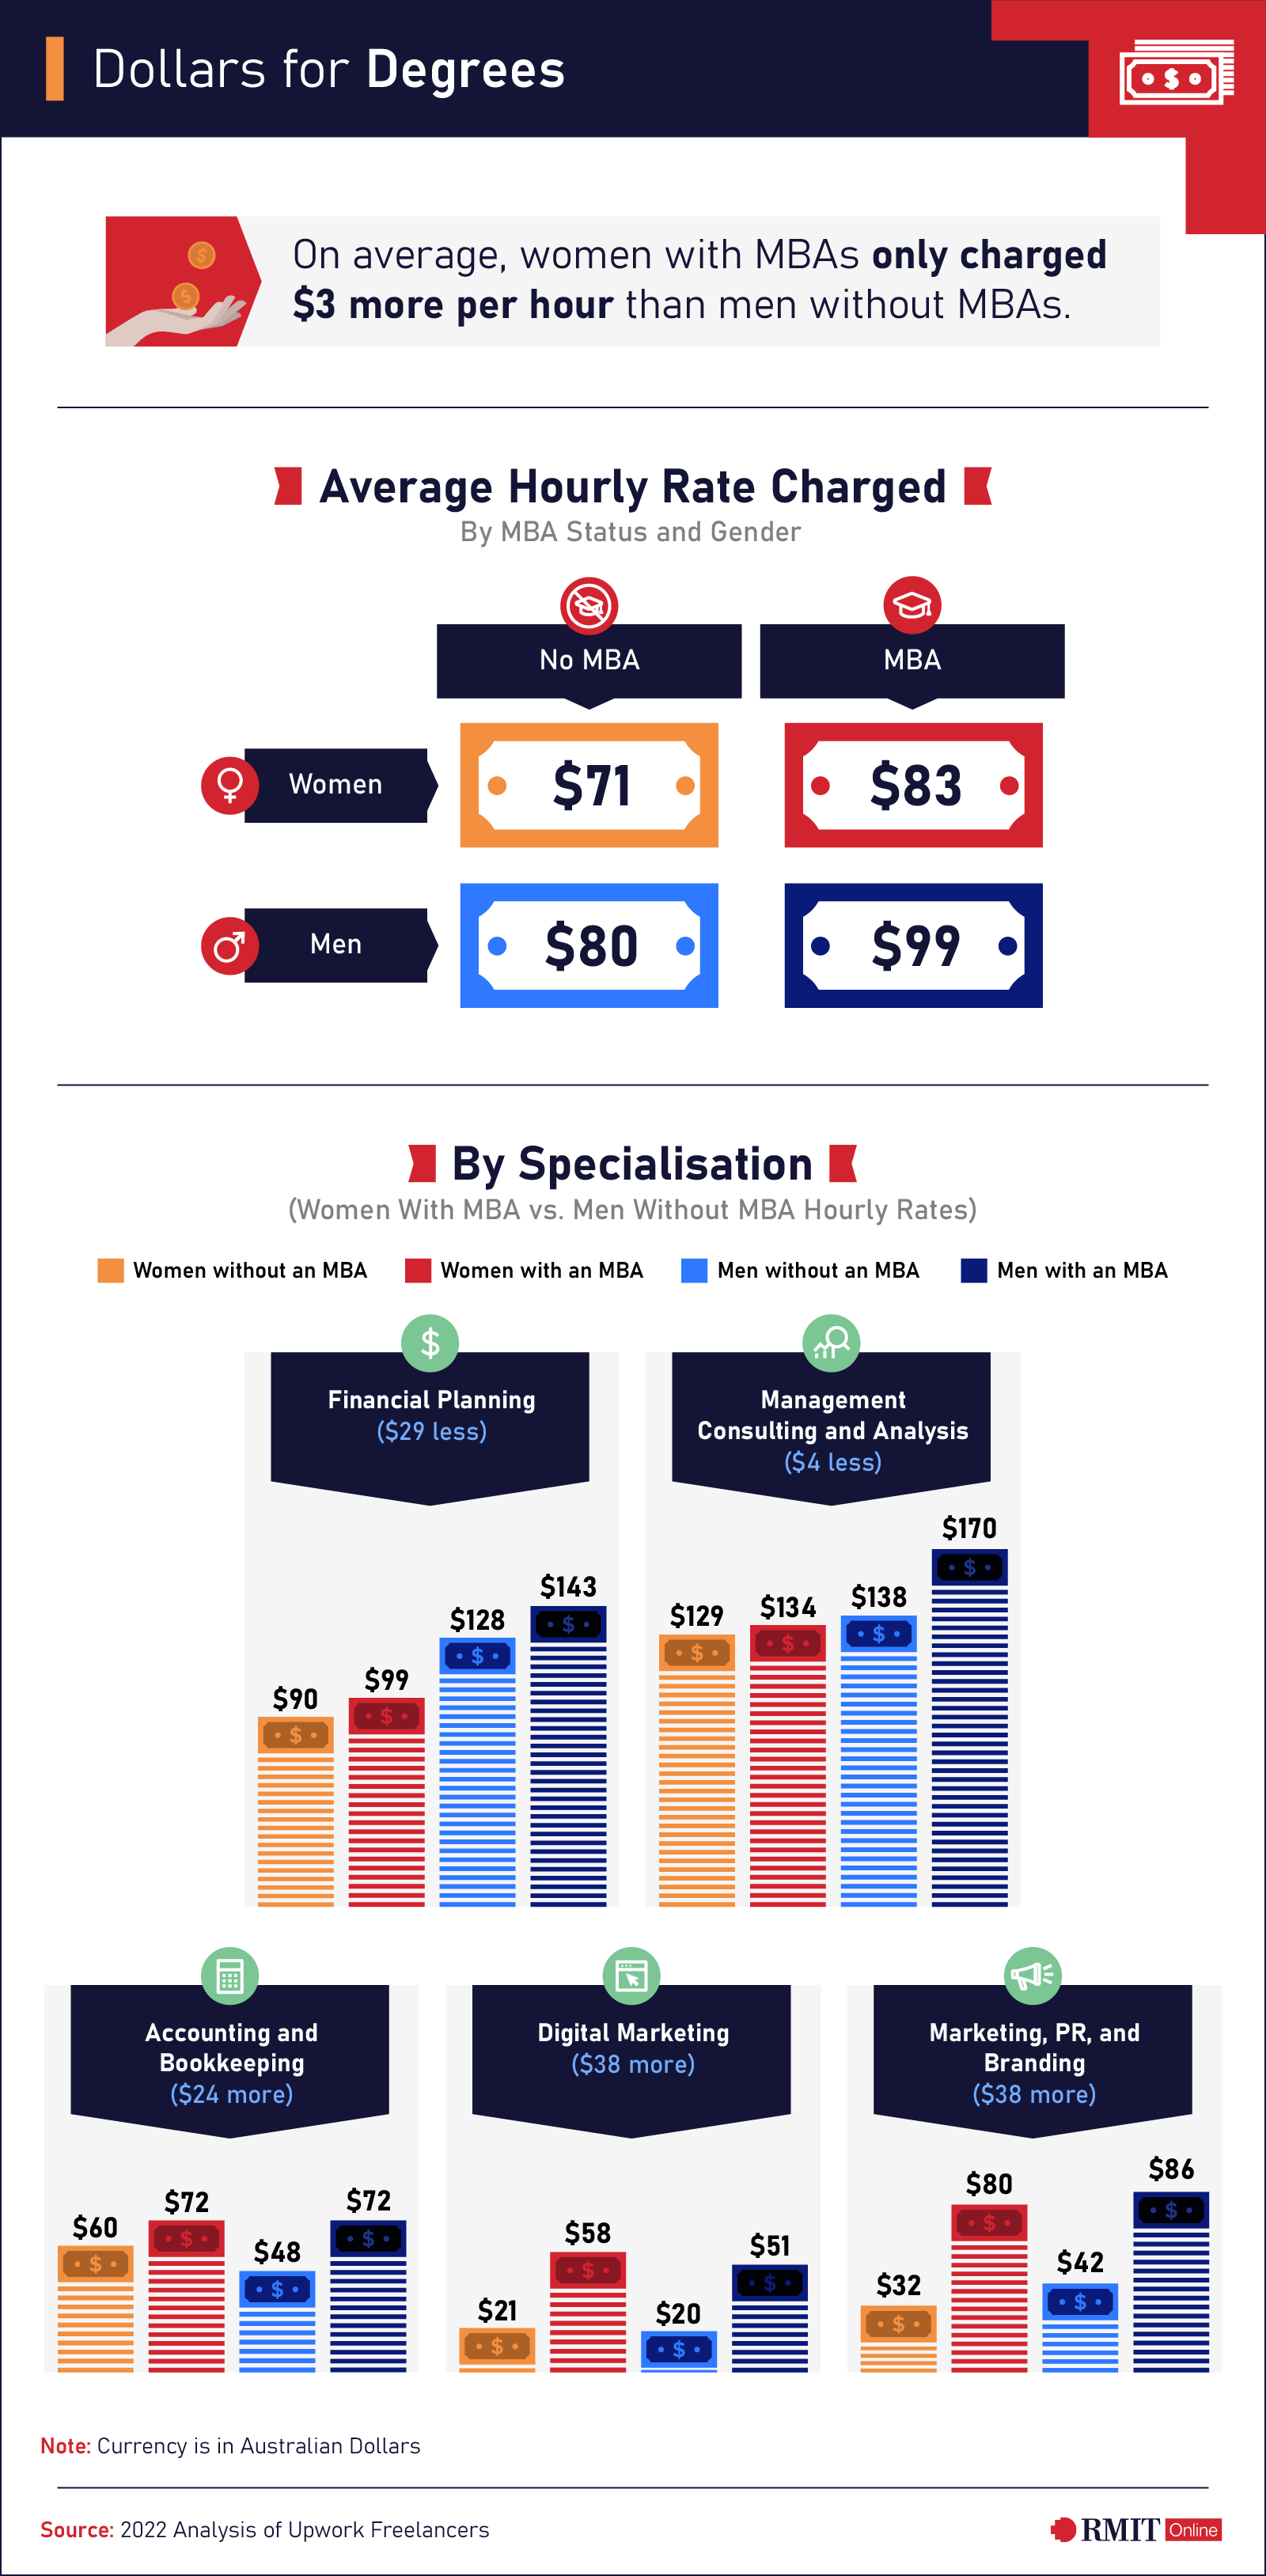 Infographic: Dollars for degrees: comparing the average hourly rate charged by MBA status and gender, as well as comparing women with MBA vs men without MBA hourly rates by specialisation: financial planning, management consulting and analysis, accounting and bookkeeping, digital marketing and marketing, PR and branding